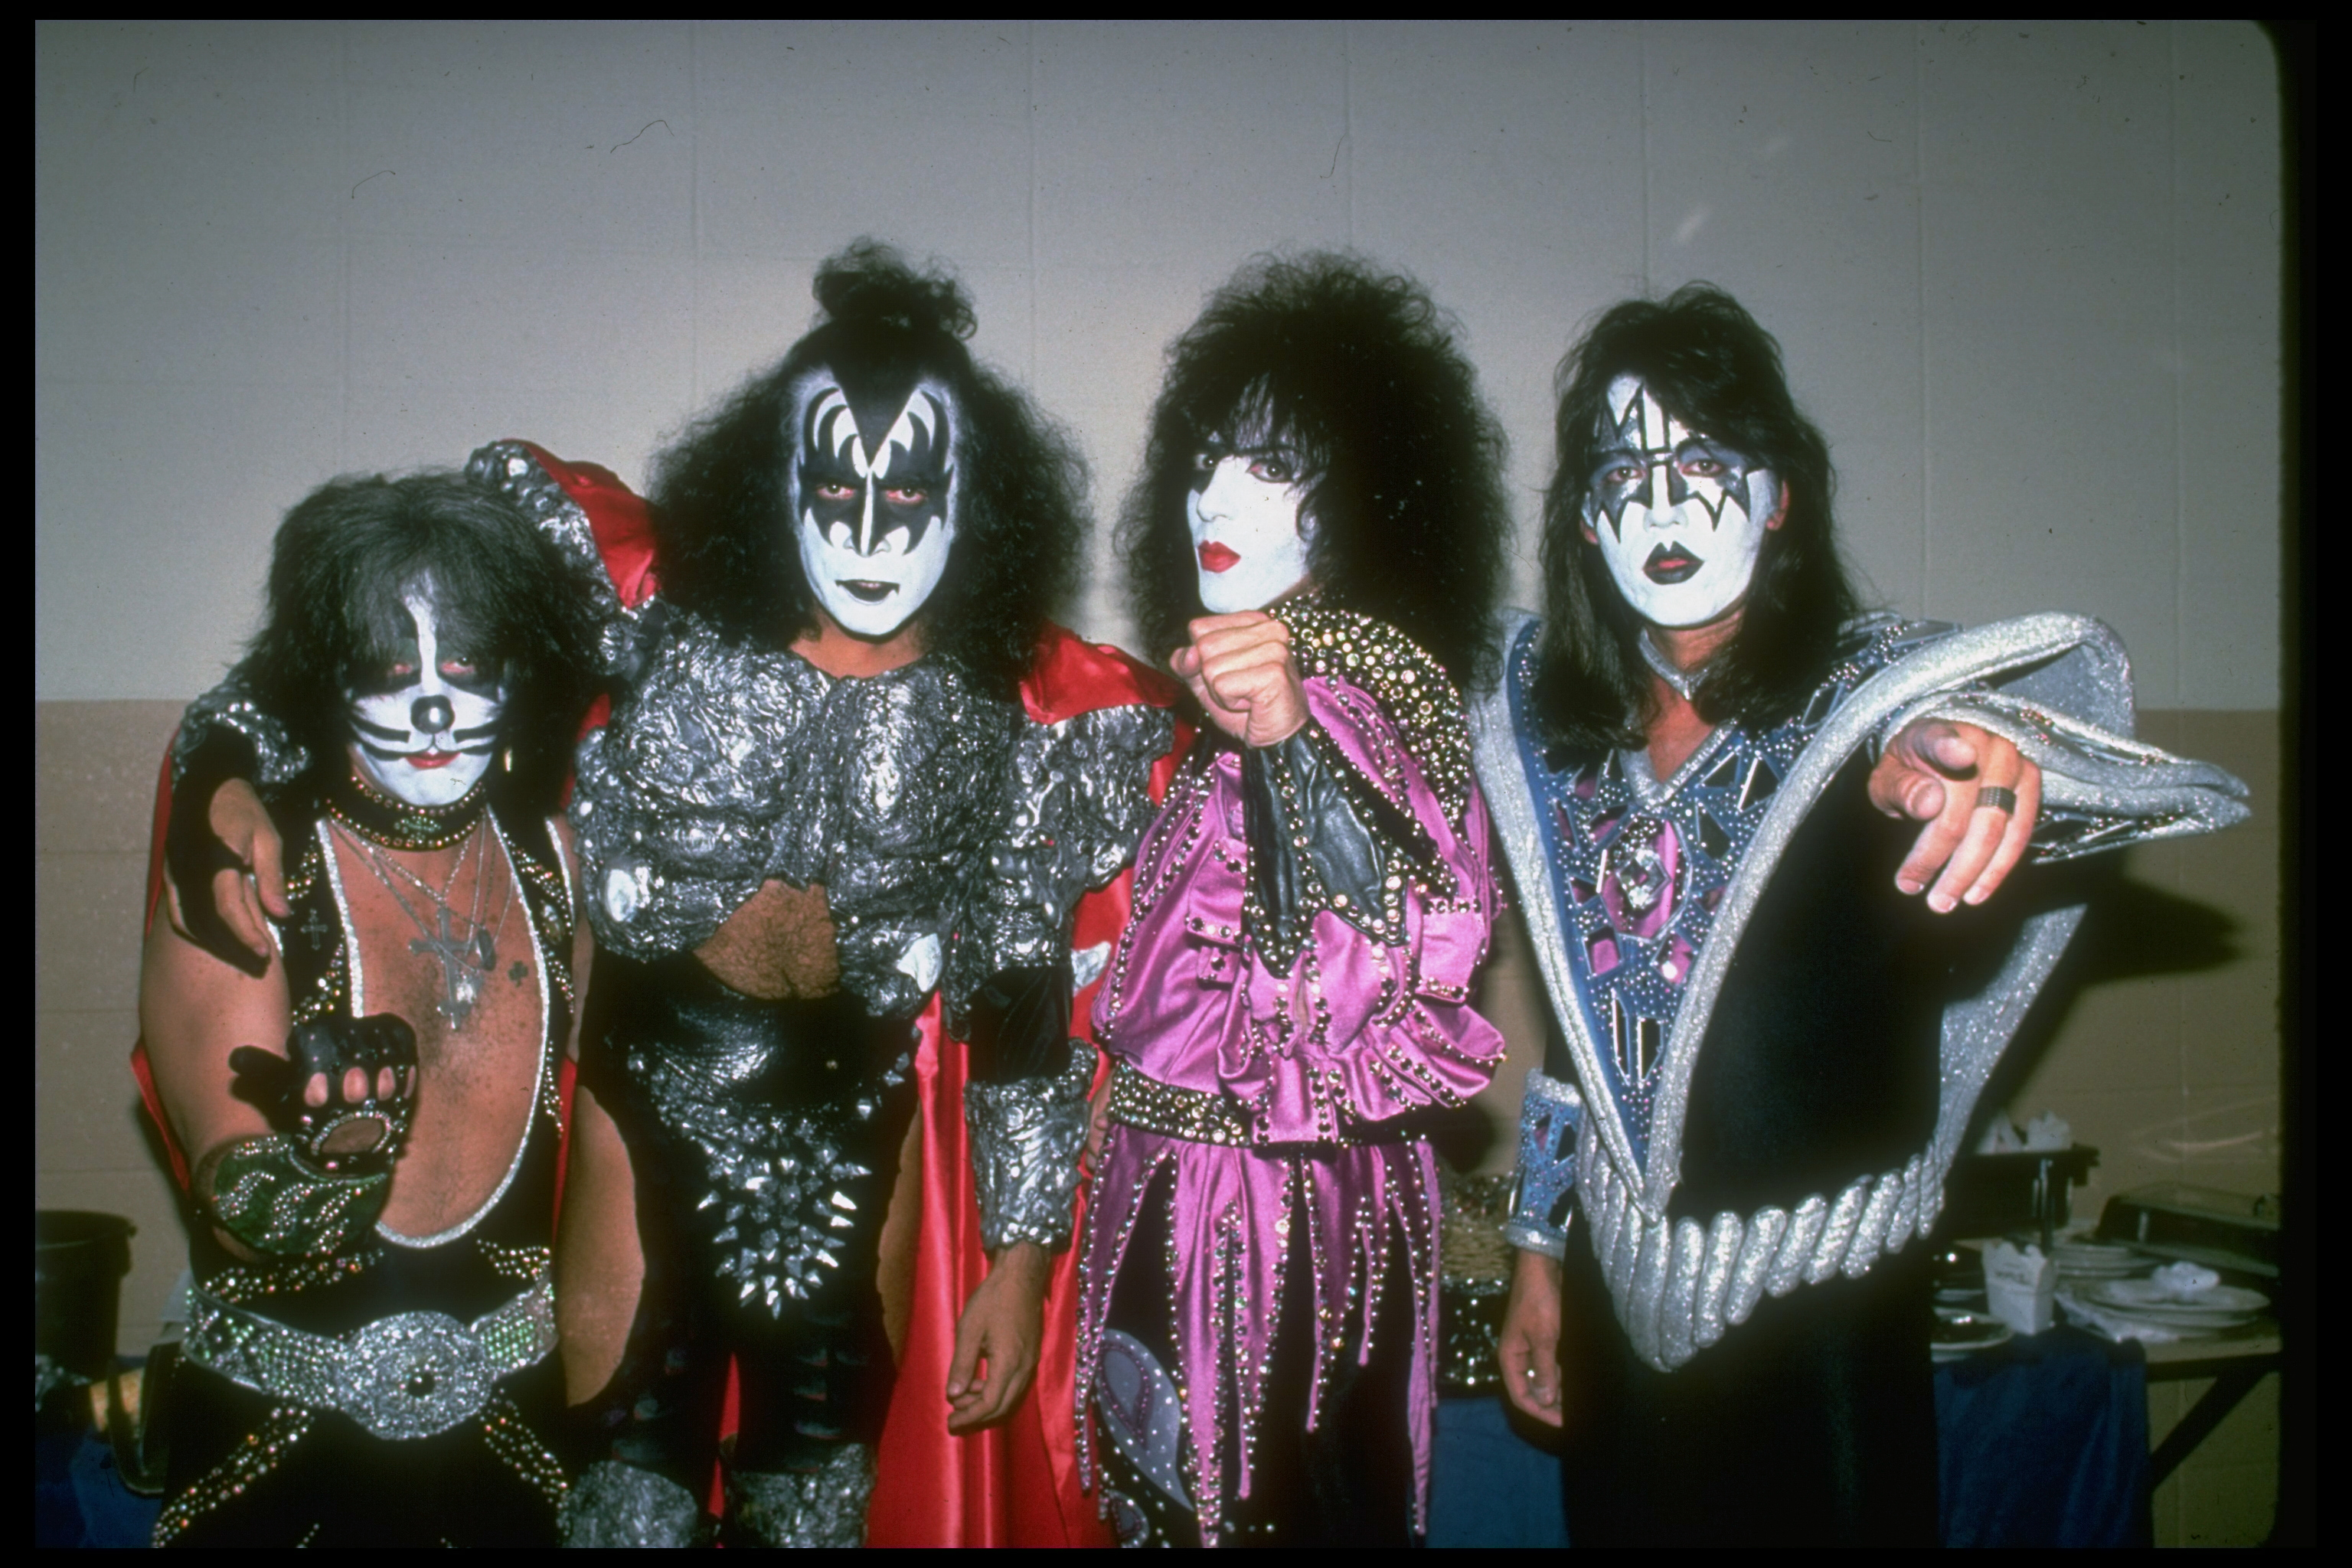 Ace Frehley, Paul Stanley, Gene Simmons and Peter Criss of the rock band Kiss | Source: Getty Images